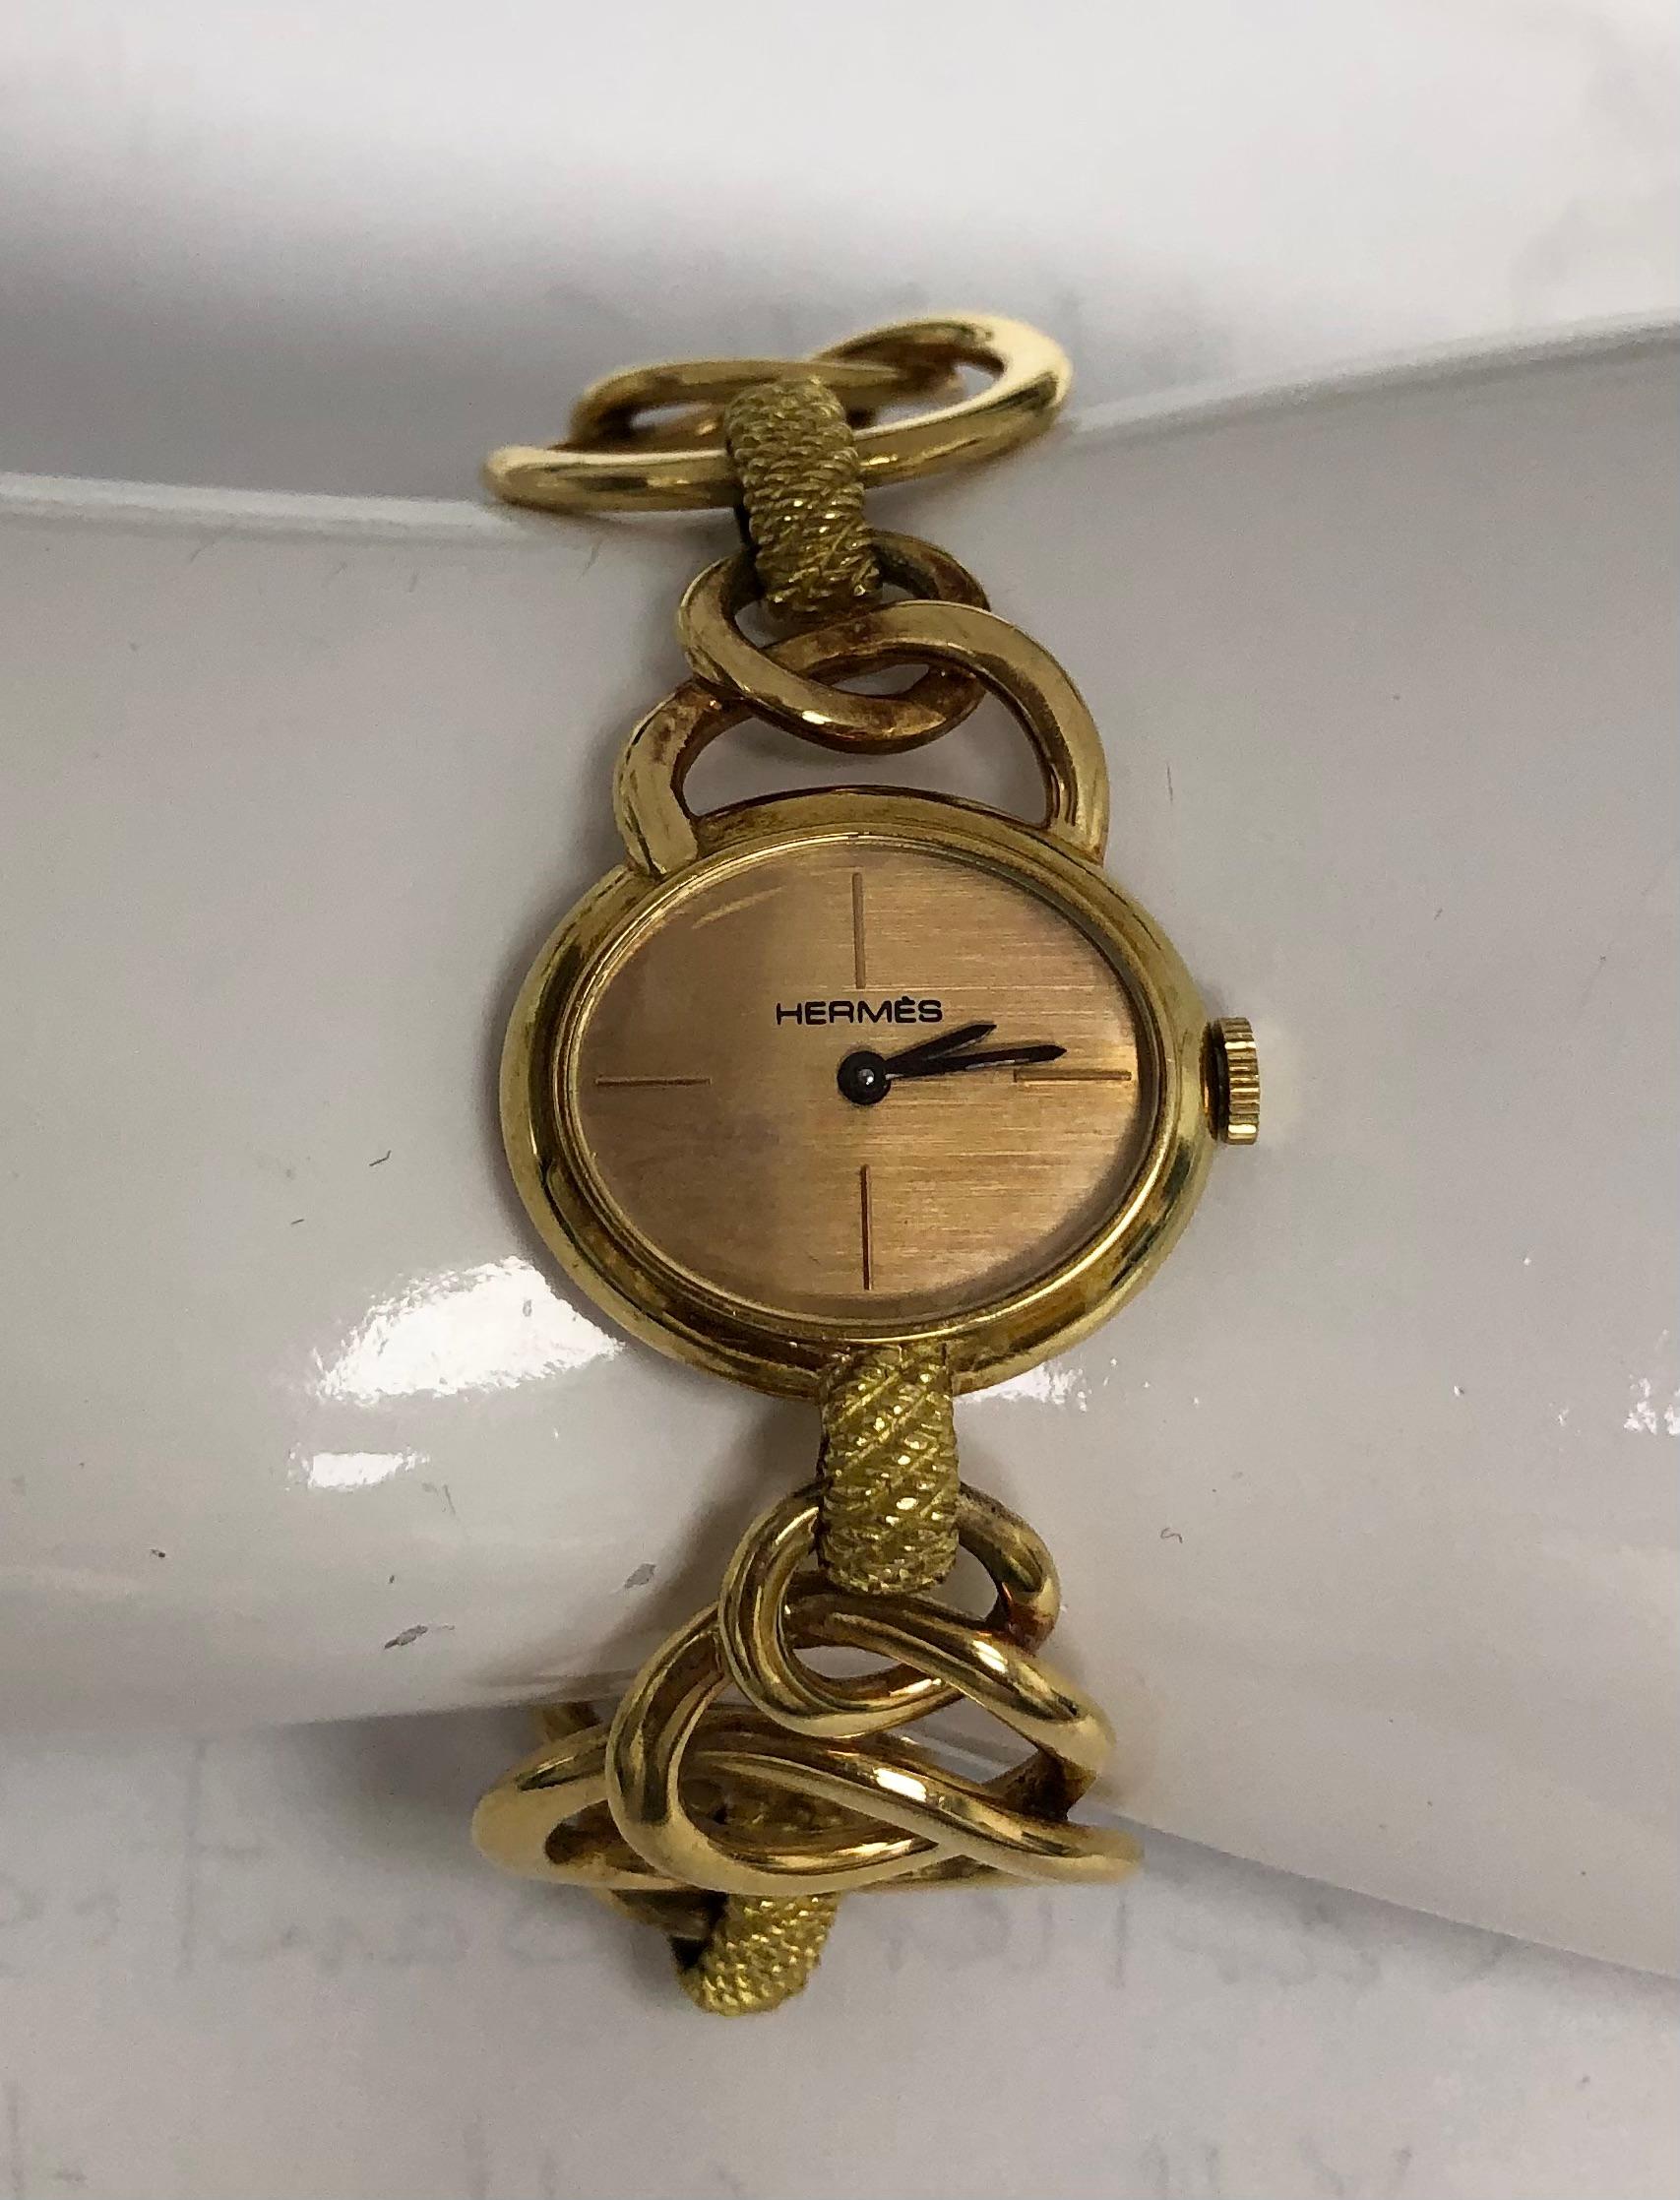 Vintage 1960' Hermes 18K yellow gold bracelet watch. Oval dial manual winding, weight: 72.6g.